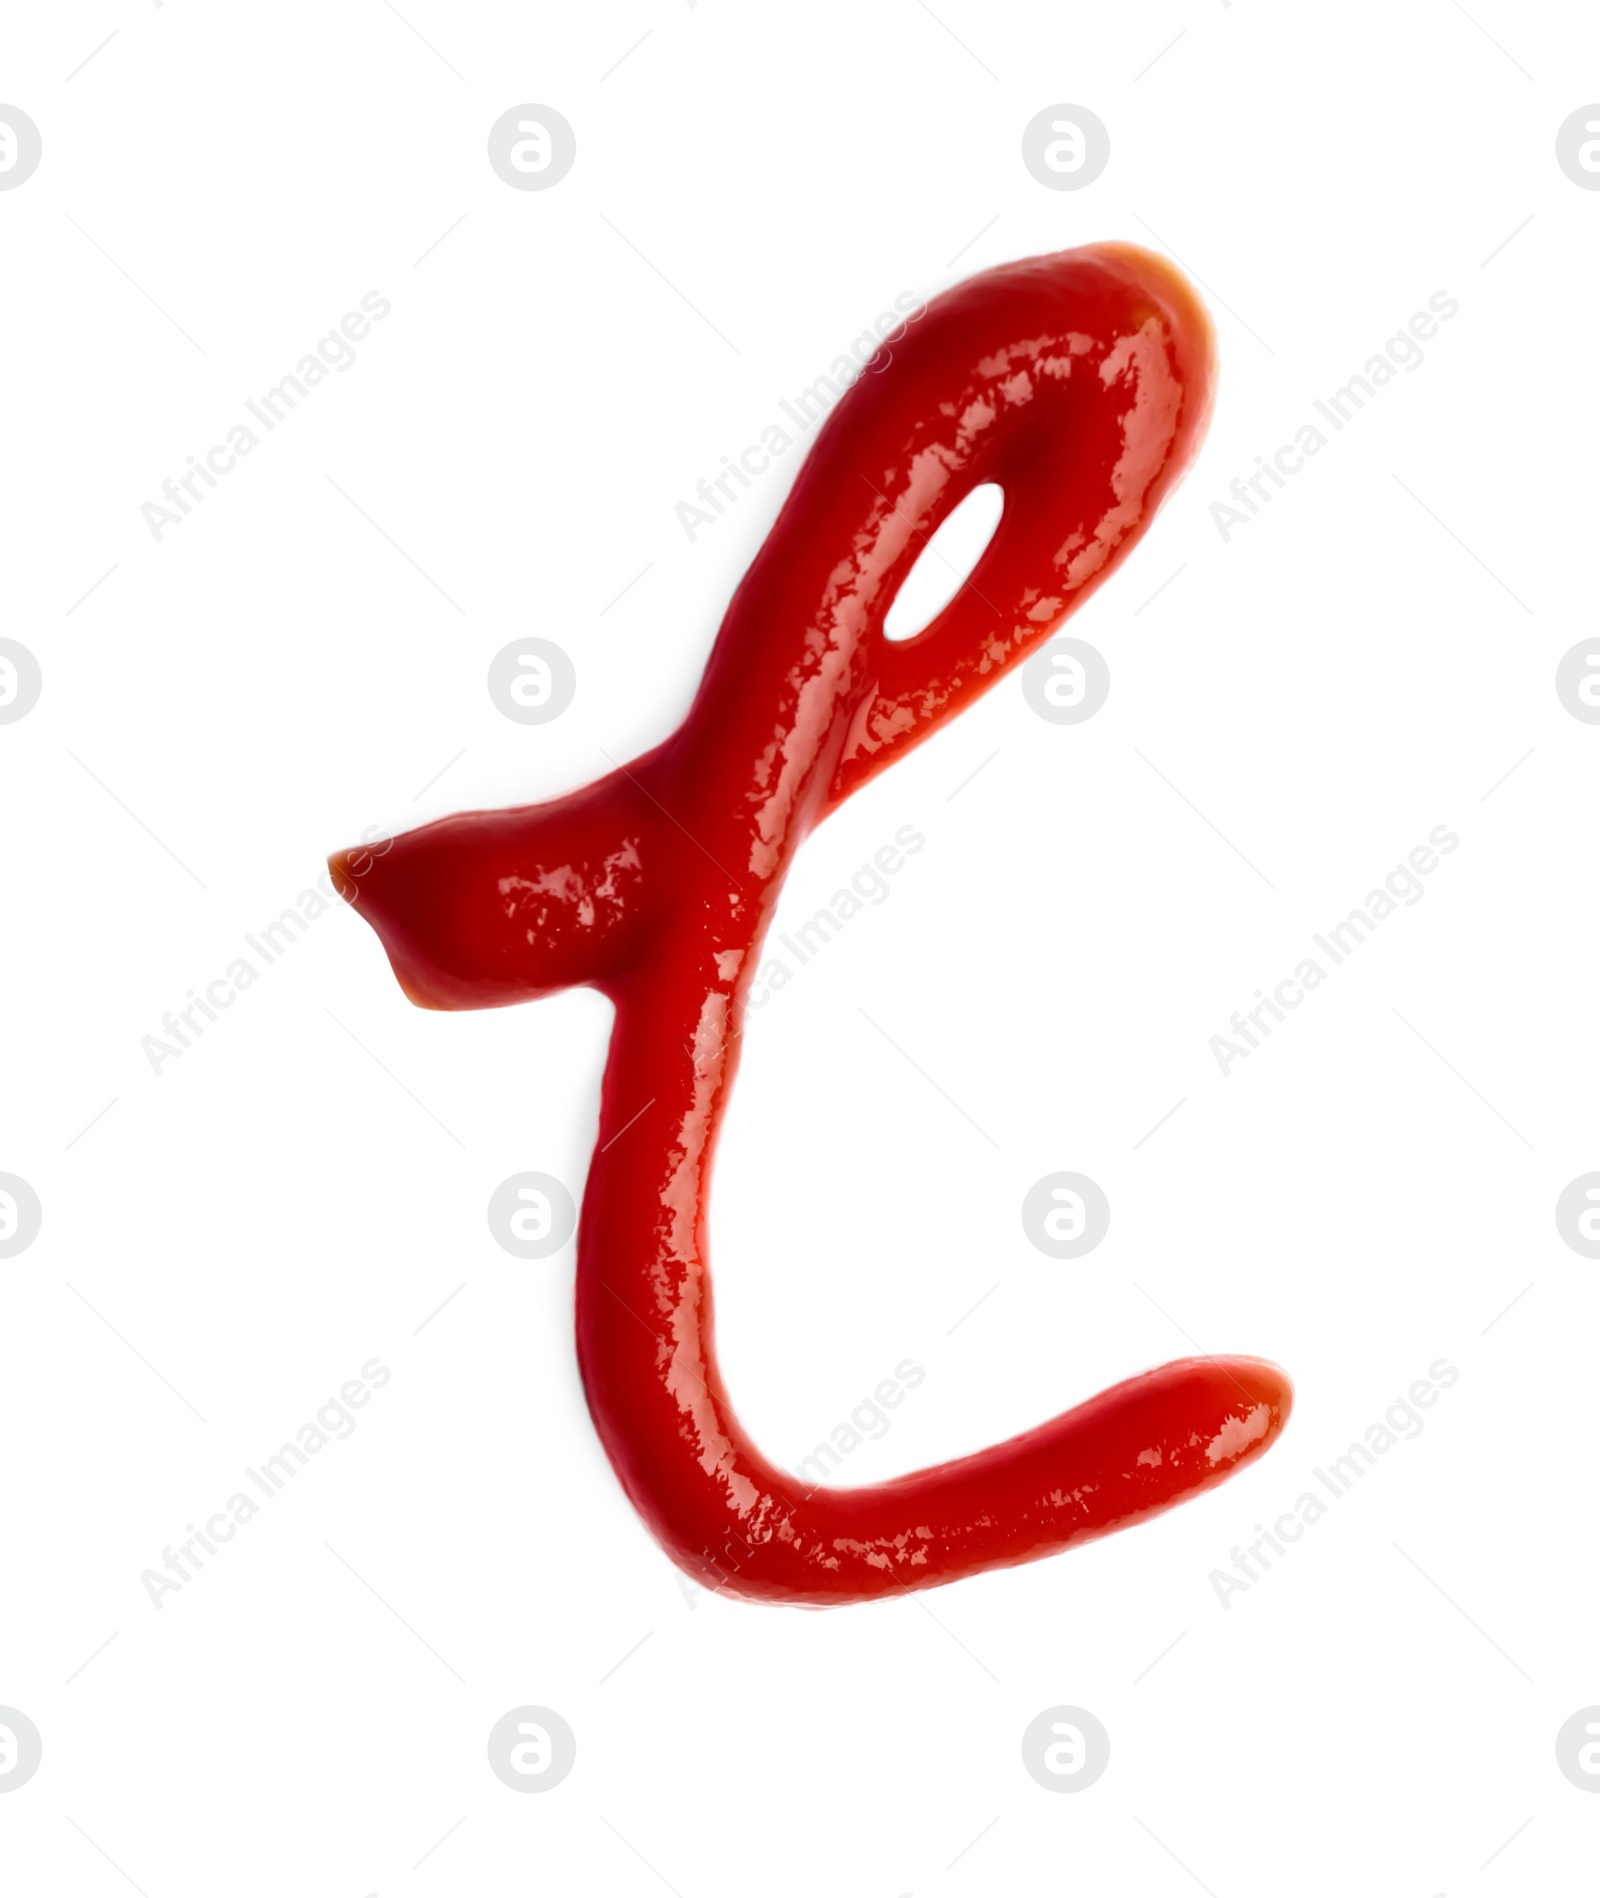 Photo of Letter L written with ketchup on white background